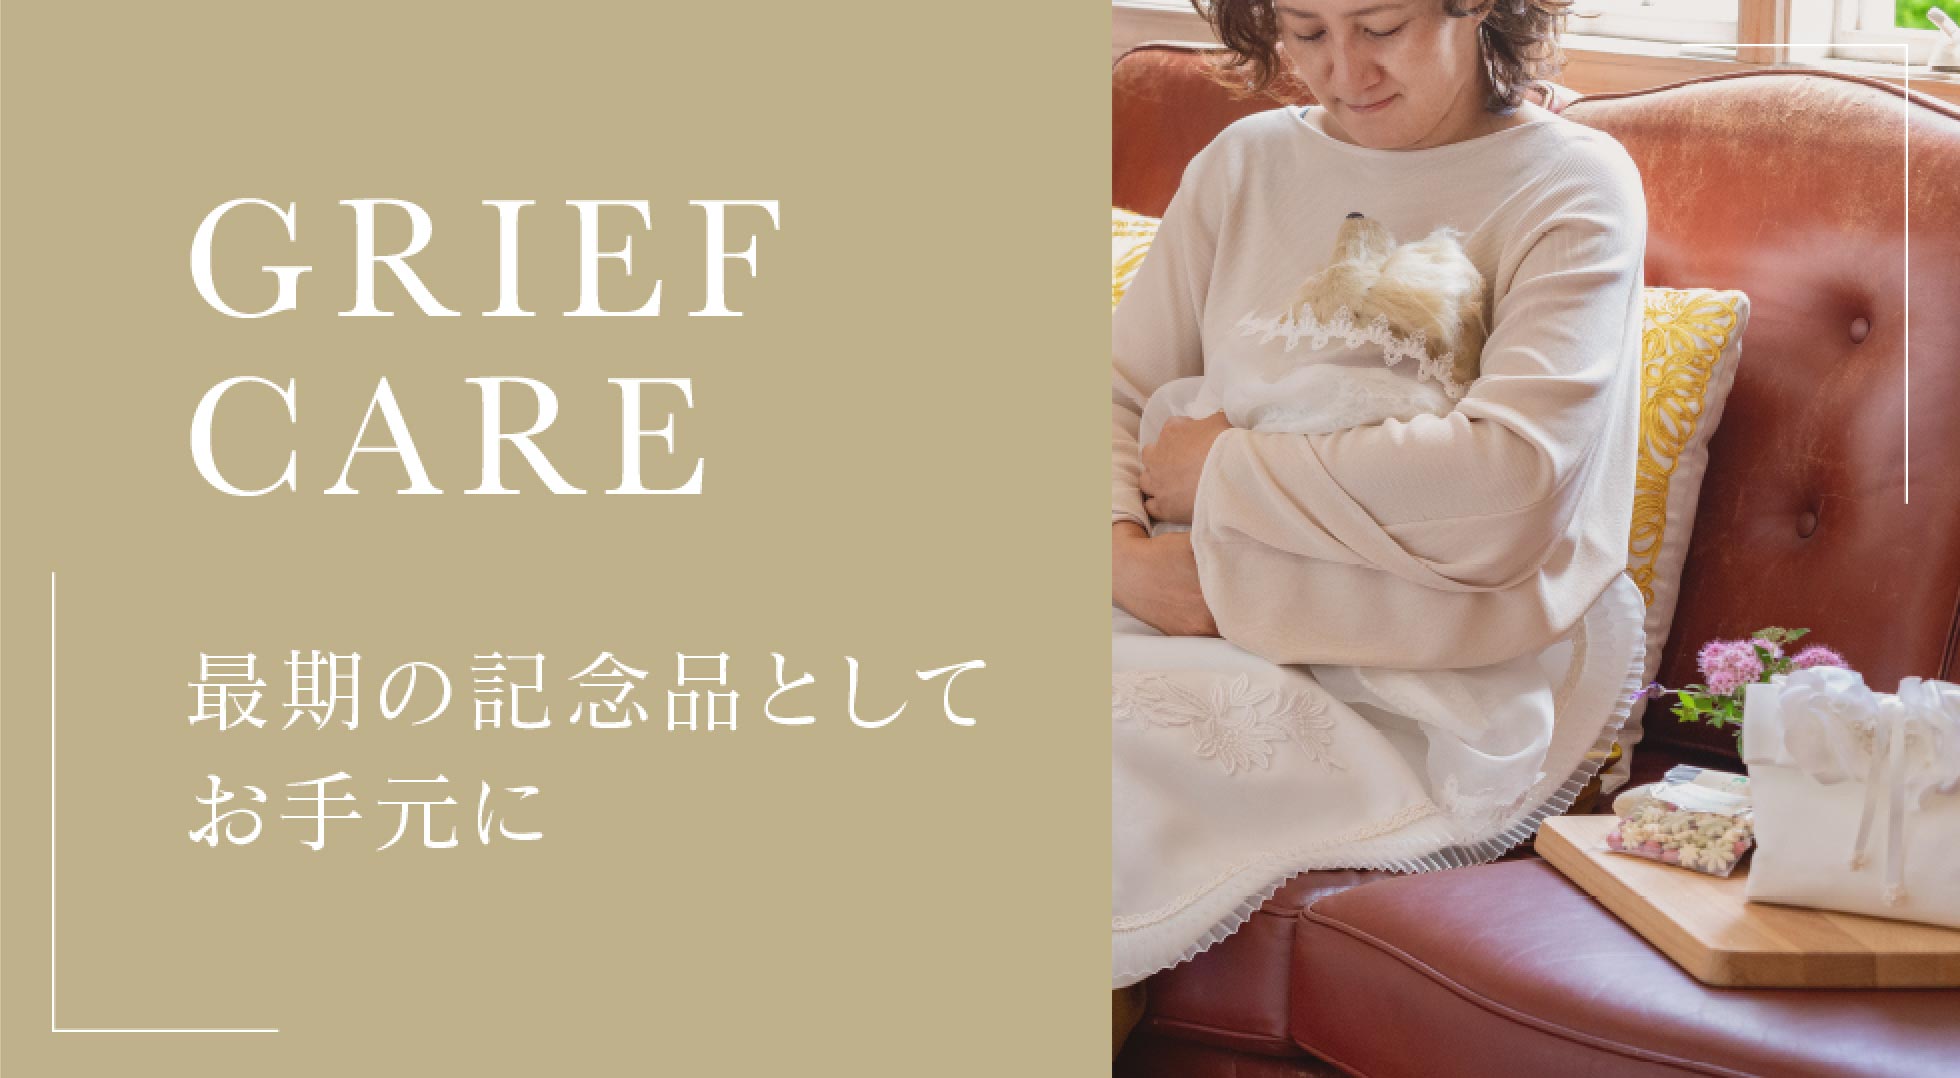 GRIEF CARE 最後の記念品としてお手元に